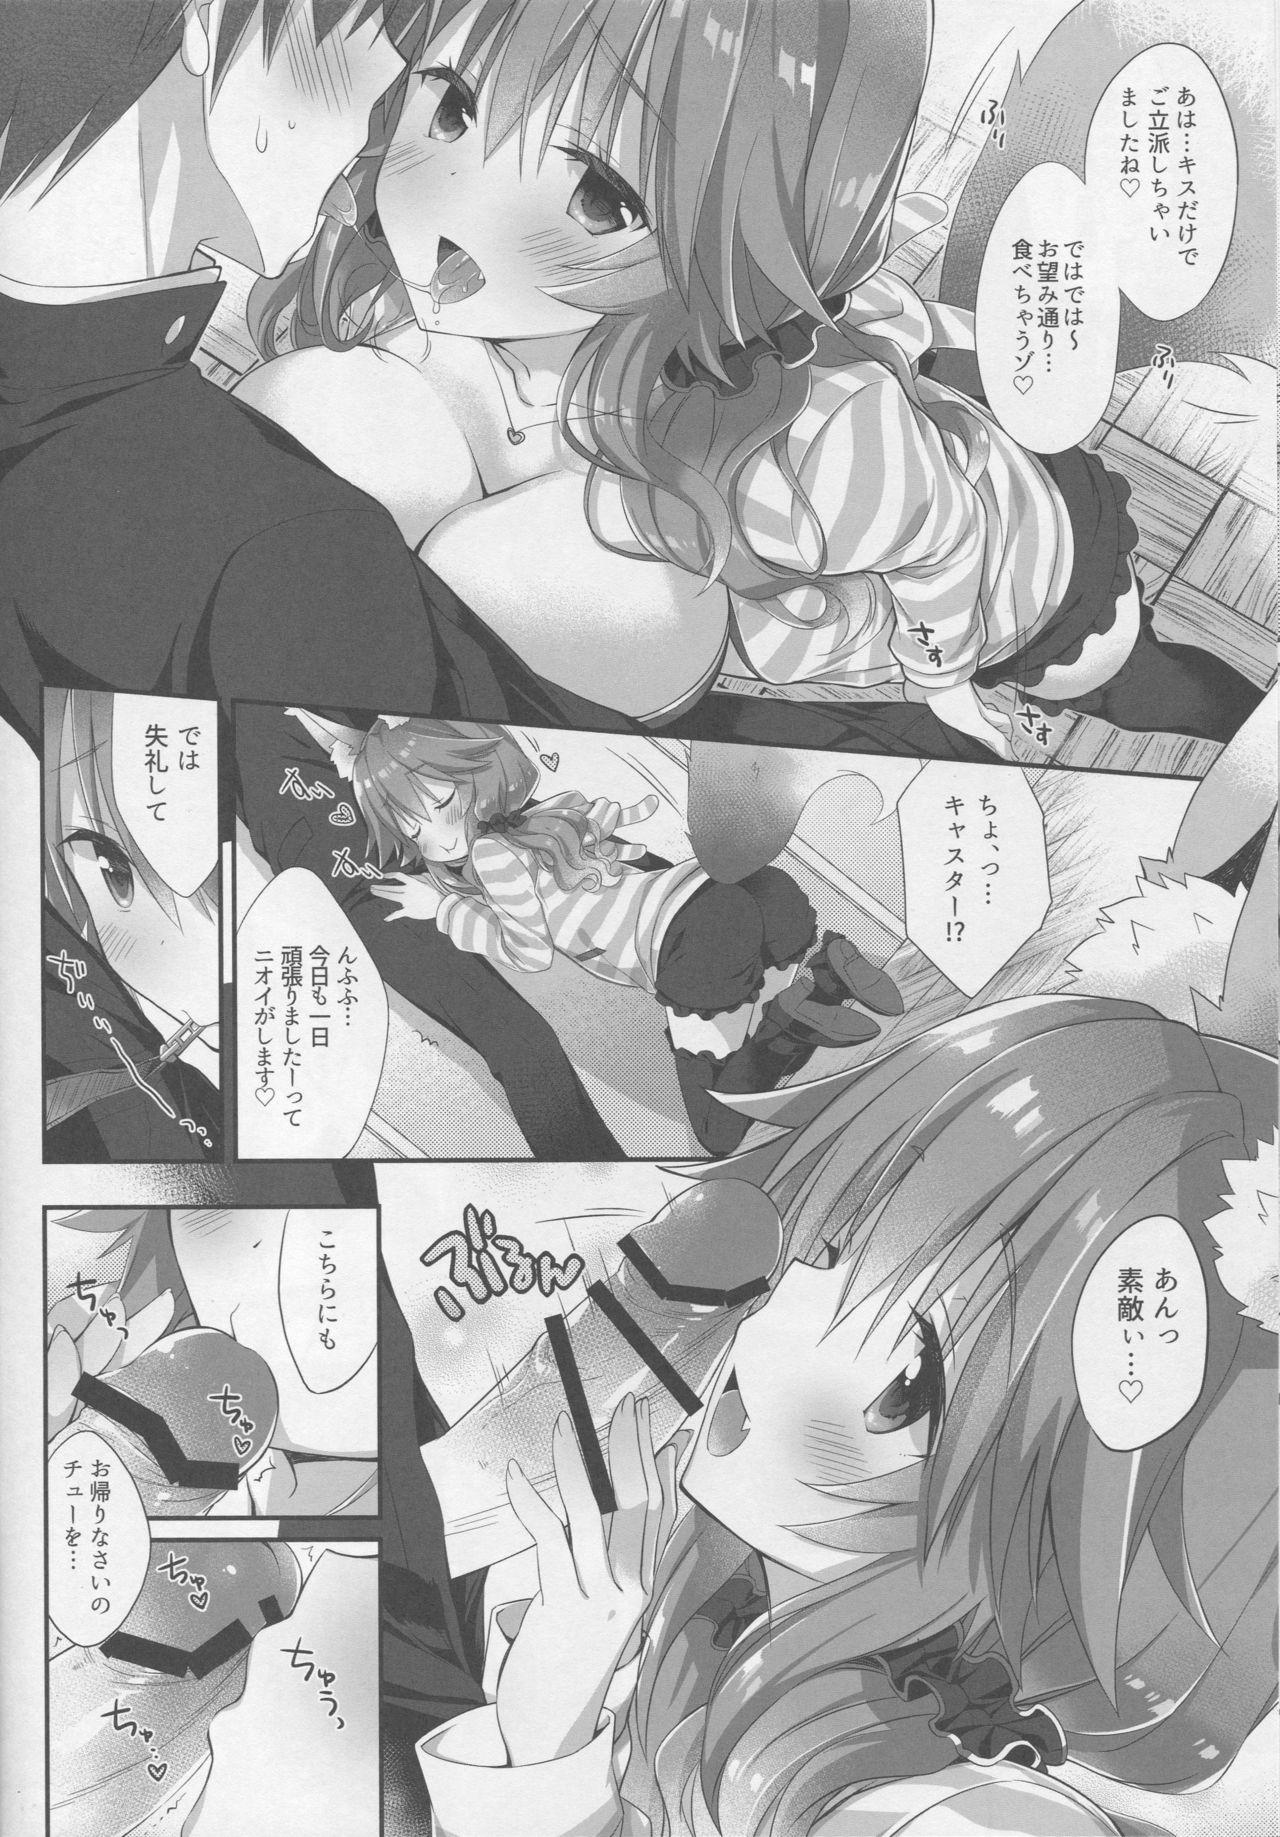 Boy Fuck Girl Ore to Tamamo to My Room 2 - Fate extra Fucking - Page 7